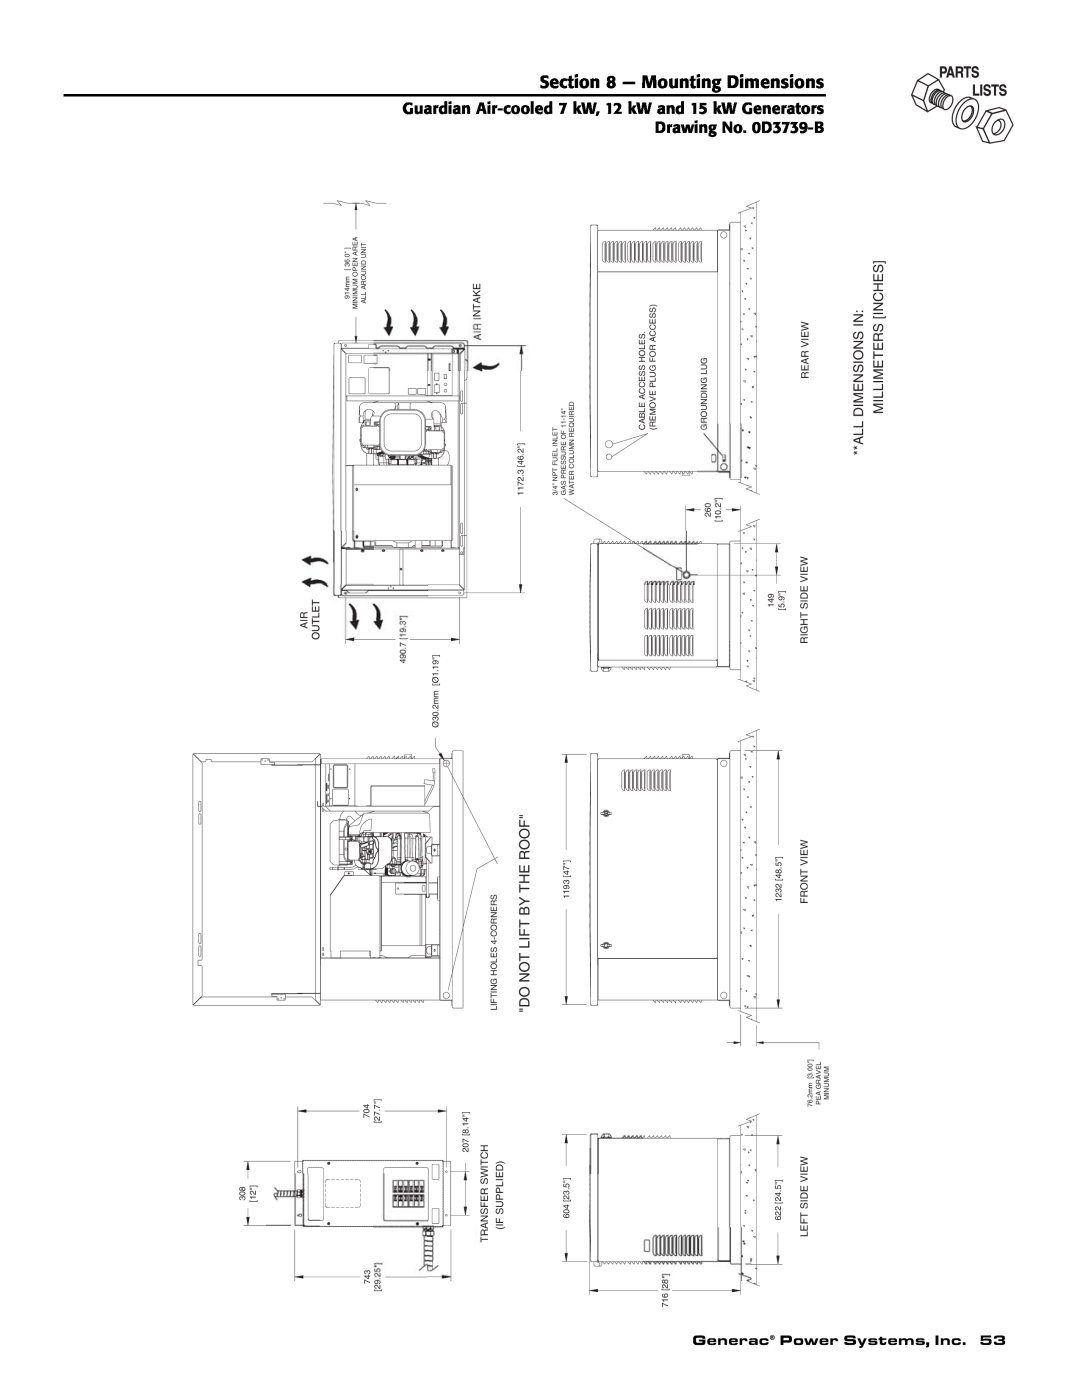 Guardian Technologies 04456-2, 04389-2 Mounting Dimensions, cooled 7 kW, 12 kW and 15 kW Generators Drawing No. 0D3739-B 